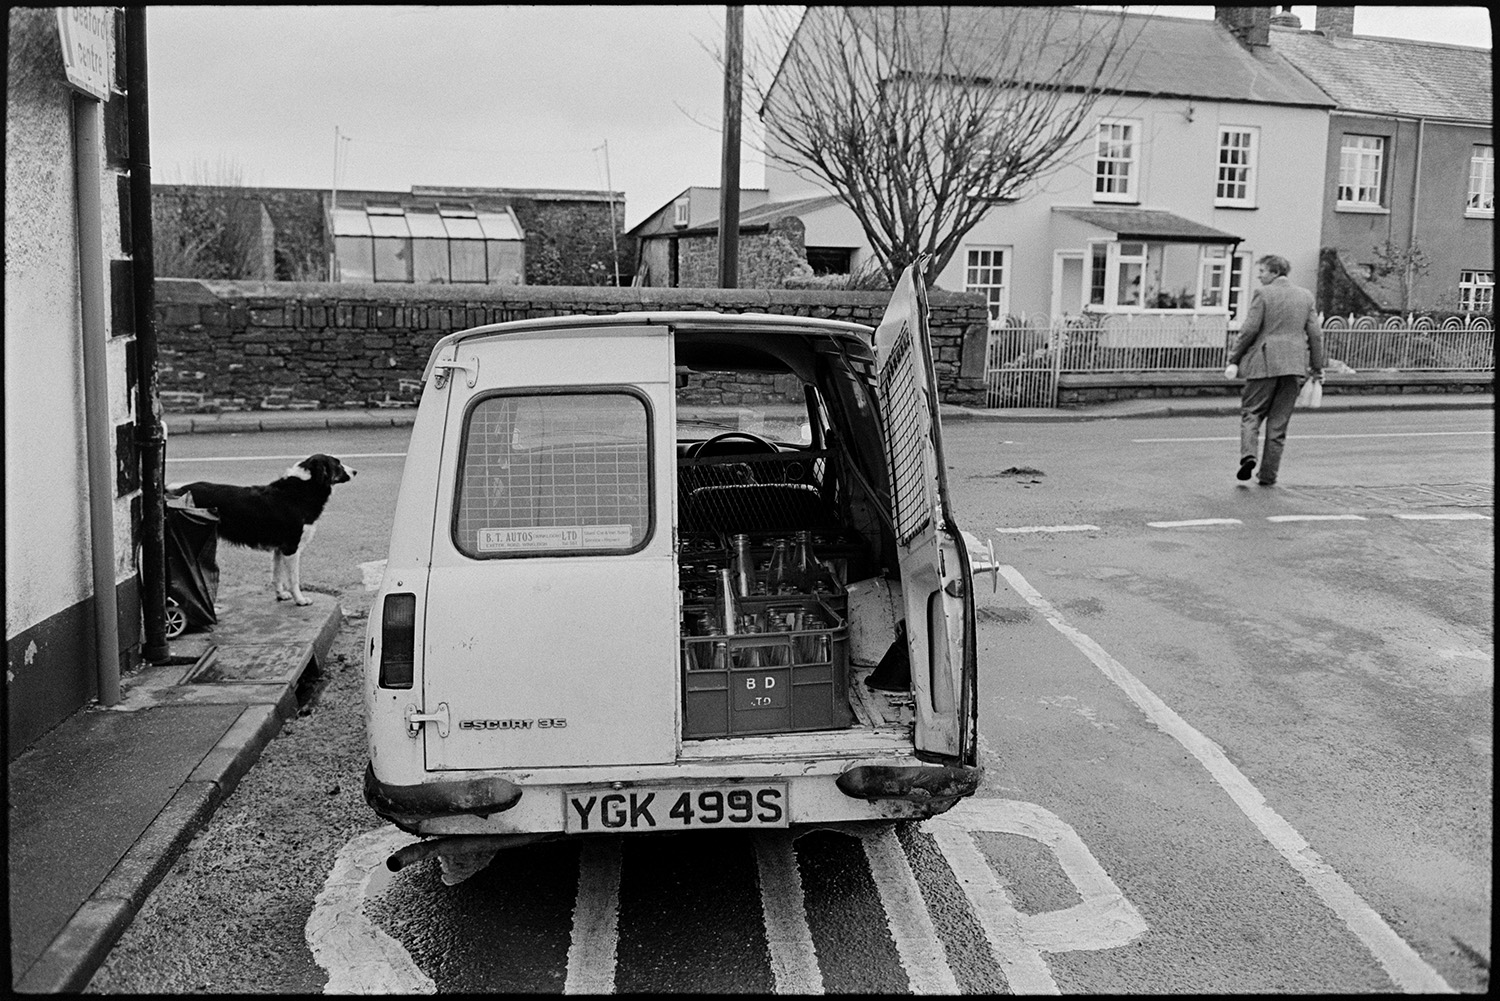 Milkman farmer on his last round in village, chatting as he delivers bottles from van.
[Ivor Bourne of Jeffrys Farm crossing a road in Beaford to deliver milk from his van on his last milk round. He is being watched by a dog standing on the corner of the street. Crates of empty milk bottles can be seen in the back of his van in the foreground.]